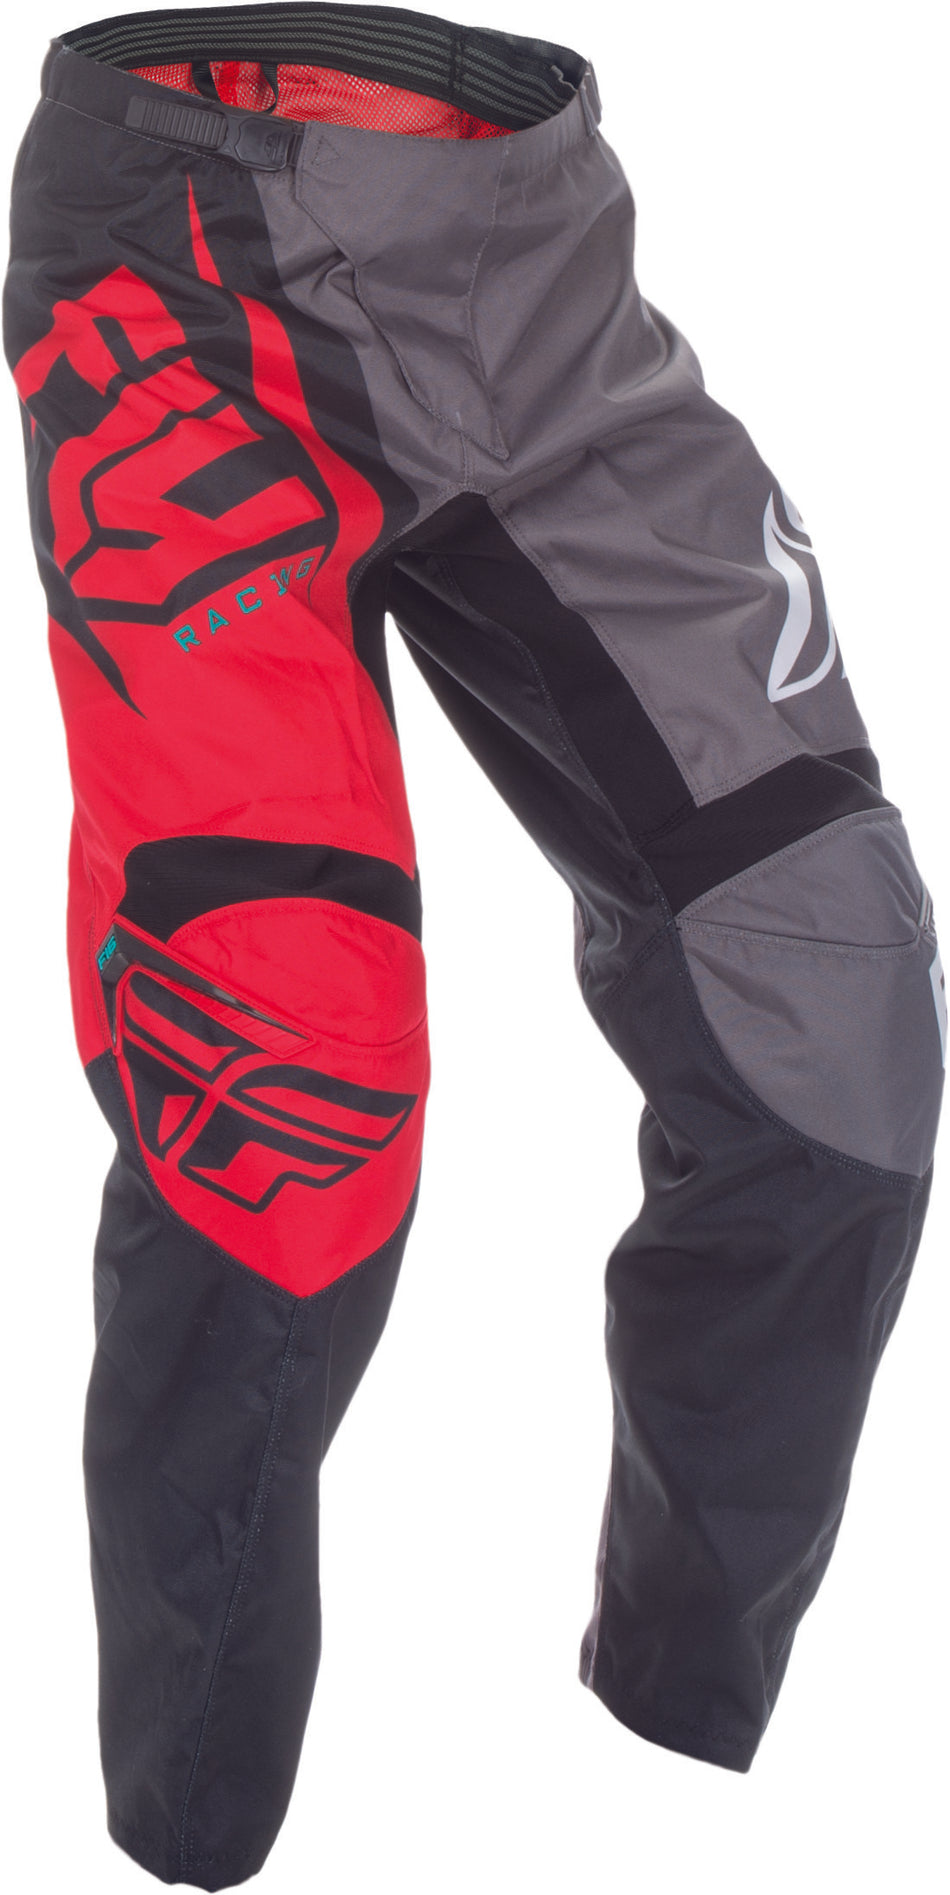 FLY RACING F-16 Pant Red/Black/Grey Sz 18 370-93218